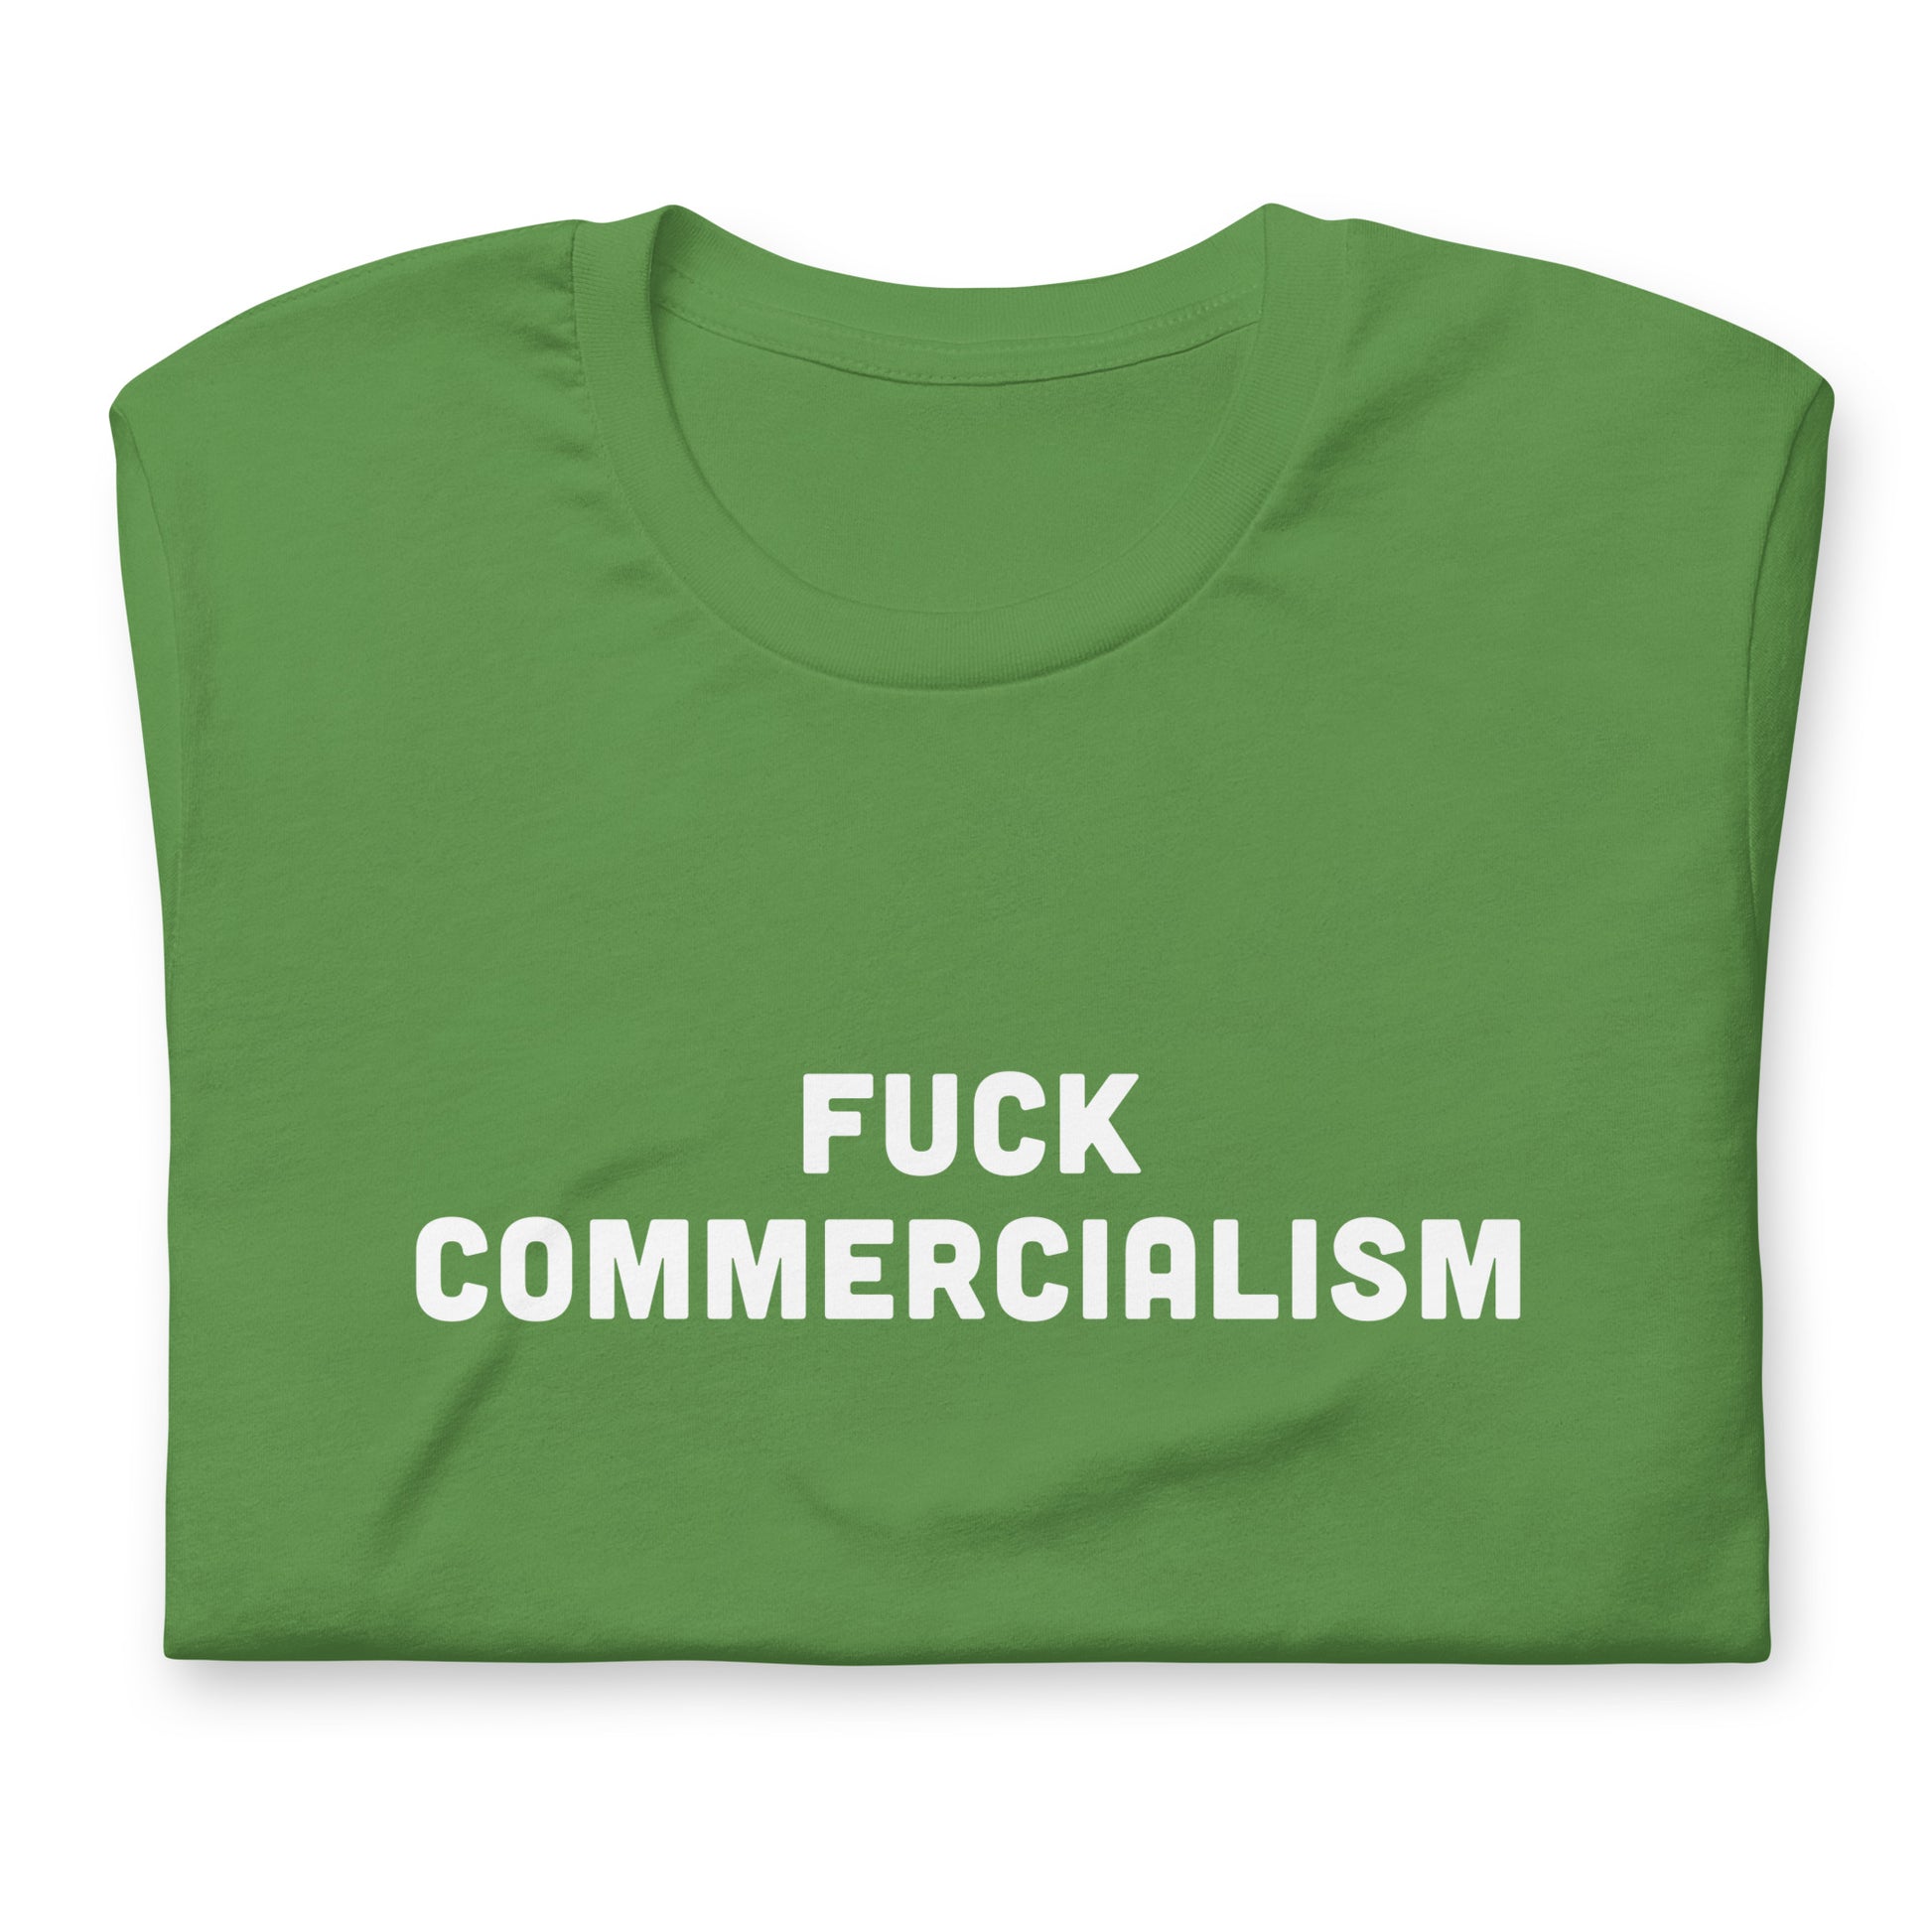 Fuck Commercialism T-Shirt Size 2XL Color Navy